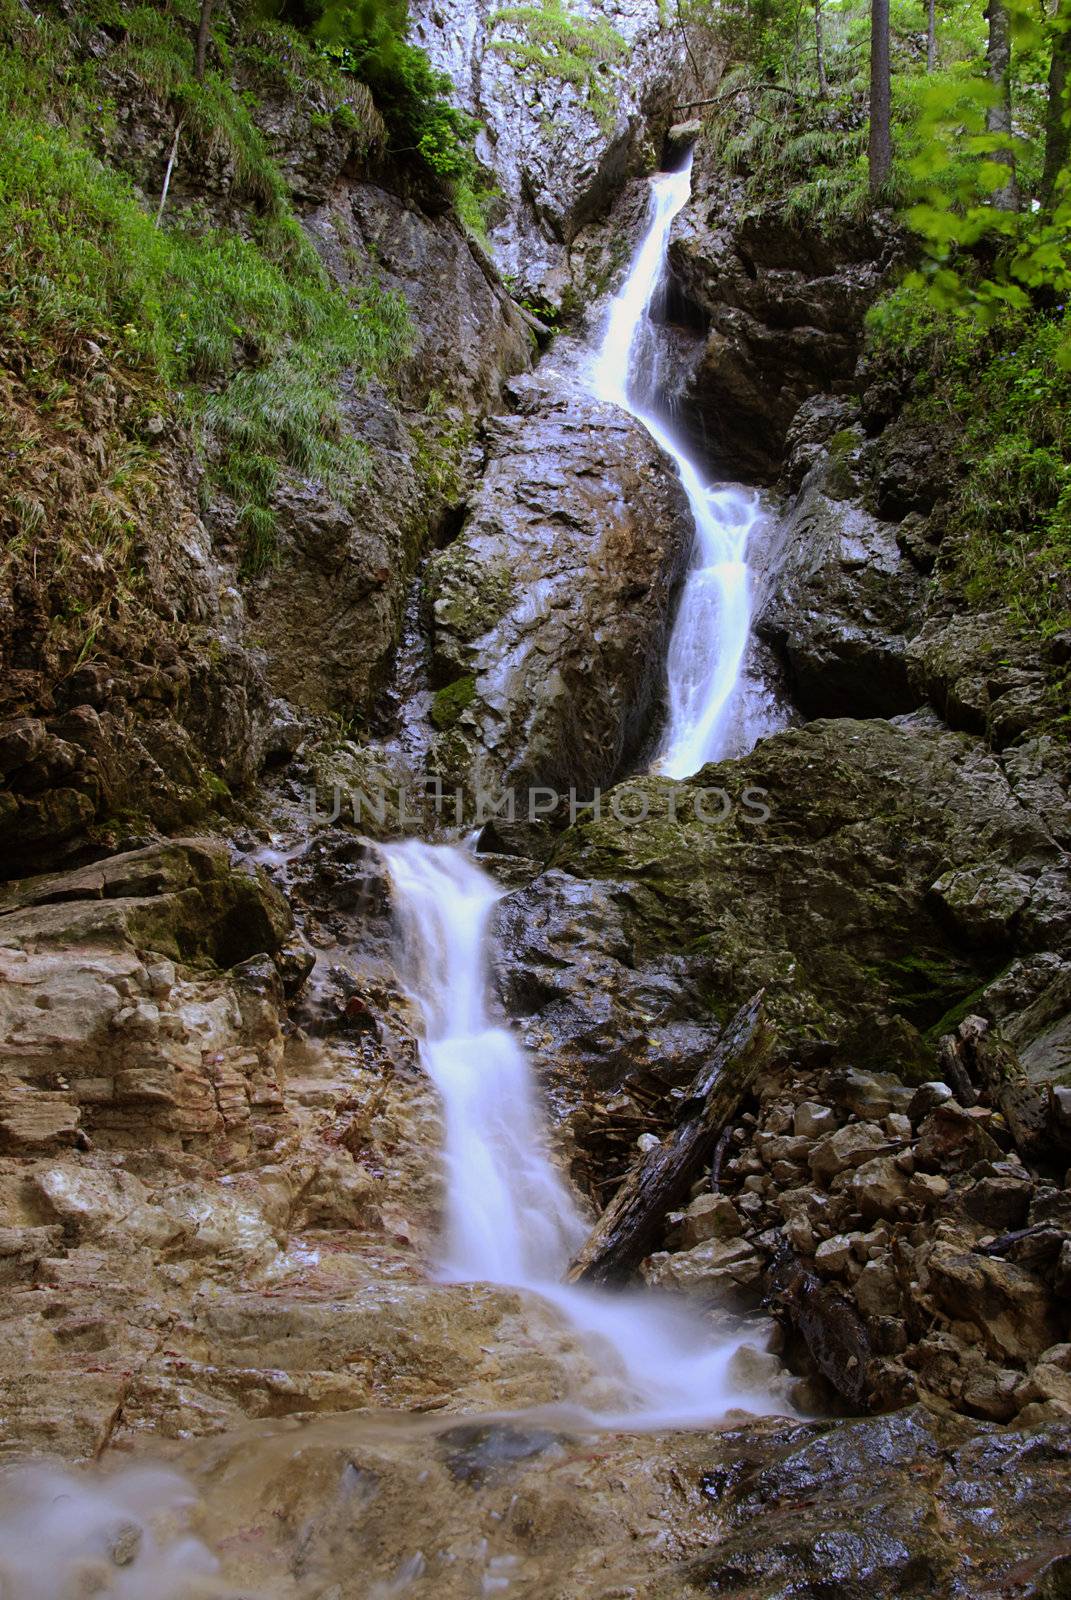 One of the many waterfalls in the Slovakian paradise natural park